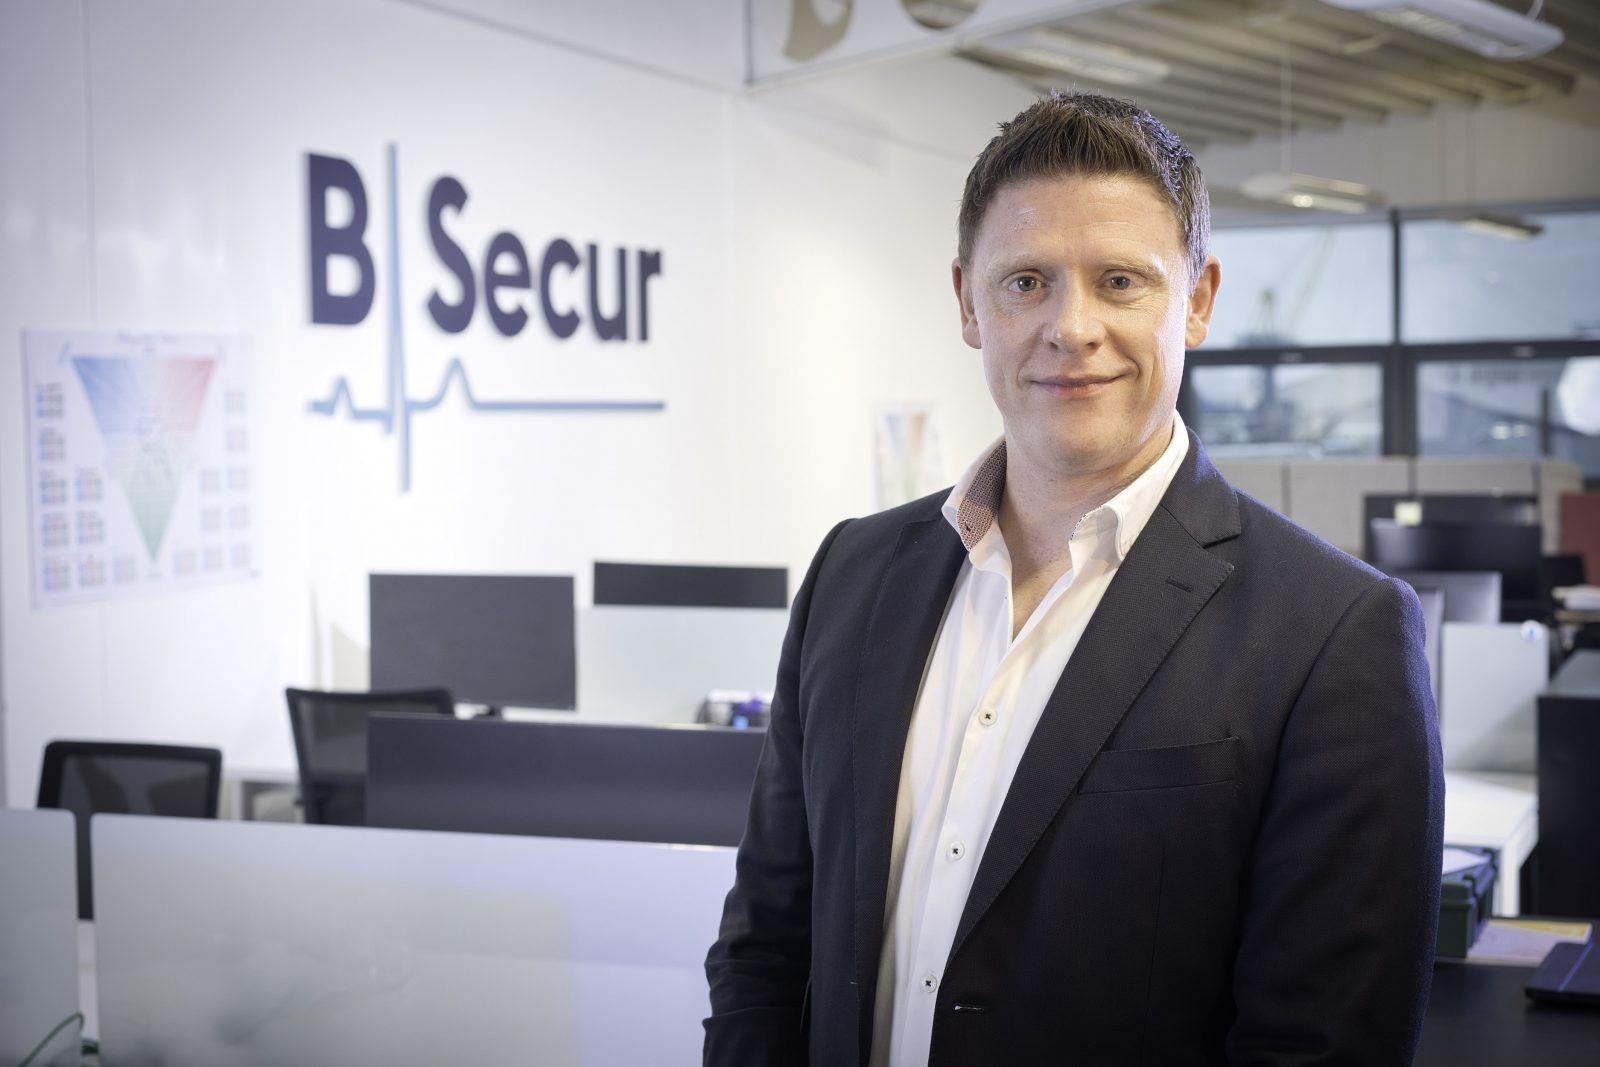 Catalyst member B-Secur Announce collaboration with US company Maxim Integrated